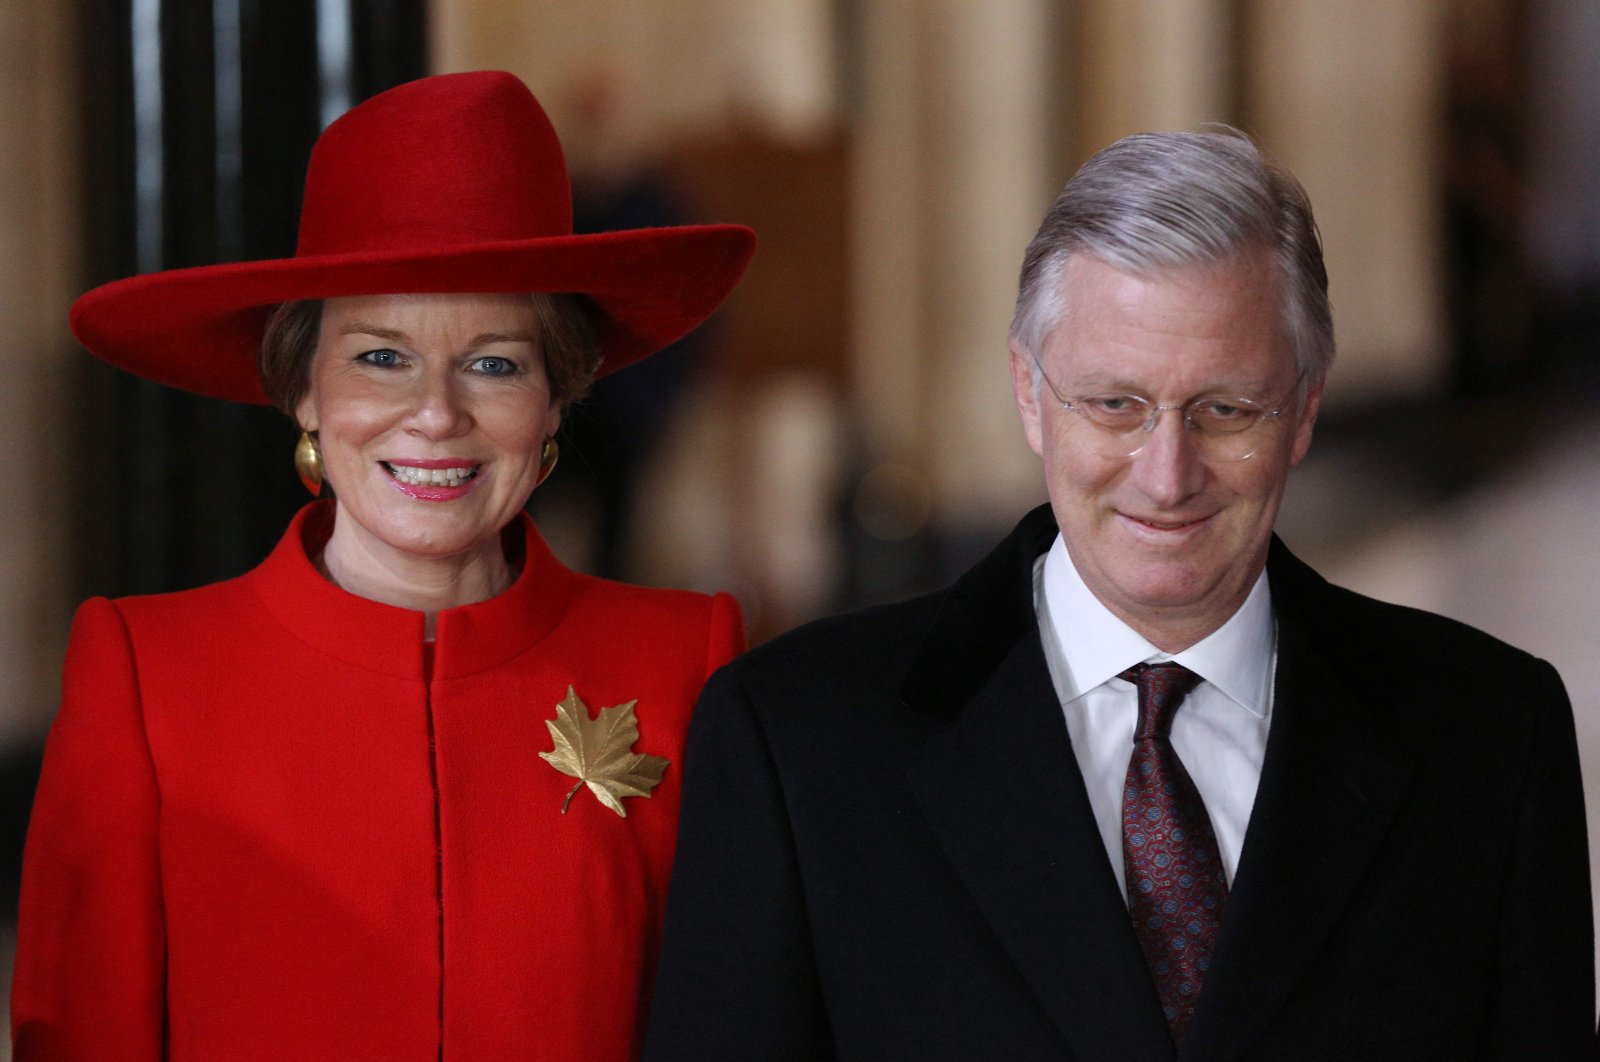 King Philippe and Queen Mathilde of Belgium pose for pictures after meeting with Canadian government representatives during a state visit, Ottawa, Ontario, Canada, March 12, 2018, (AFP File Photo)